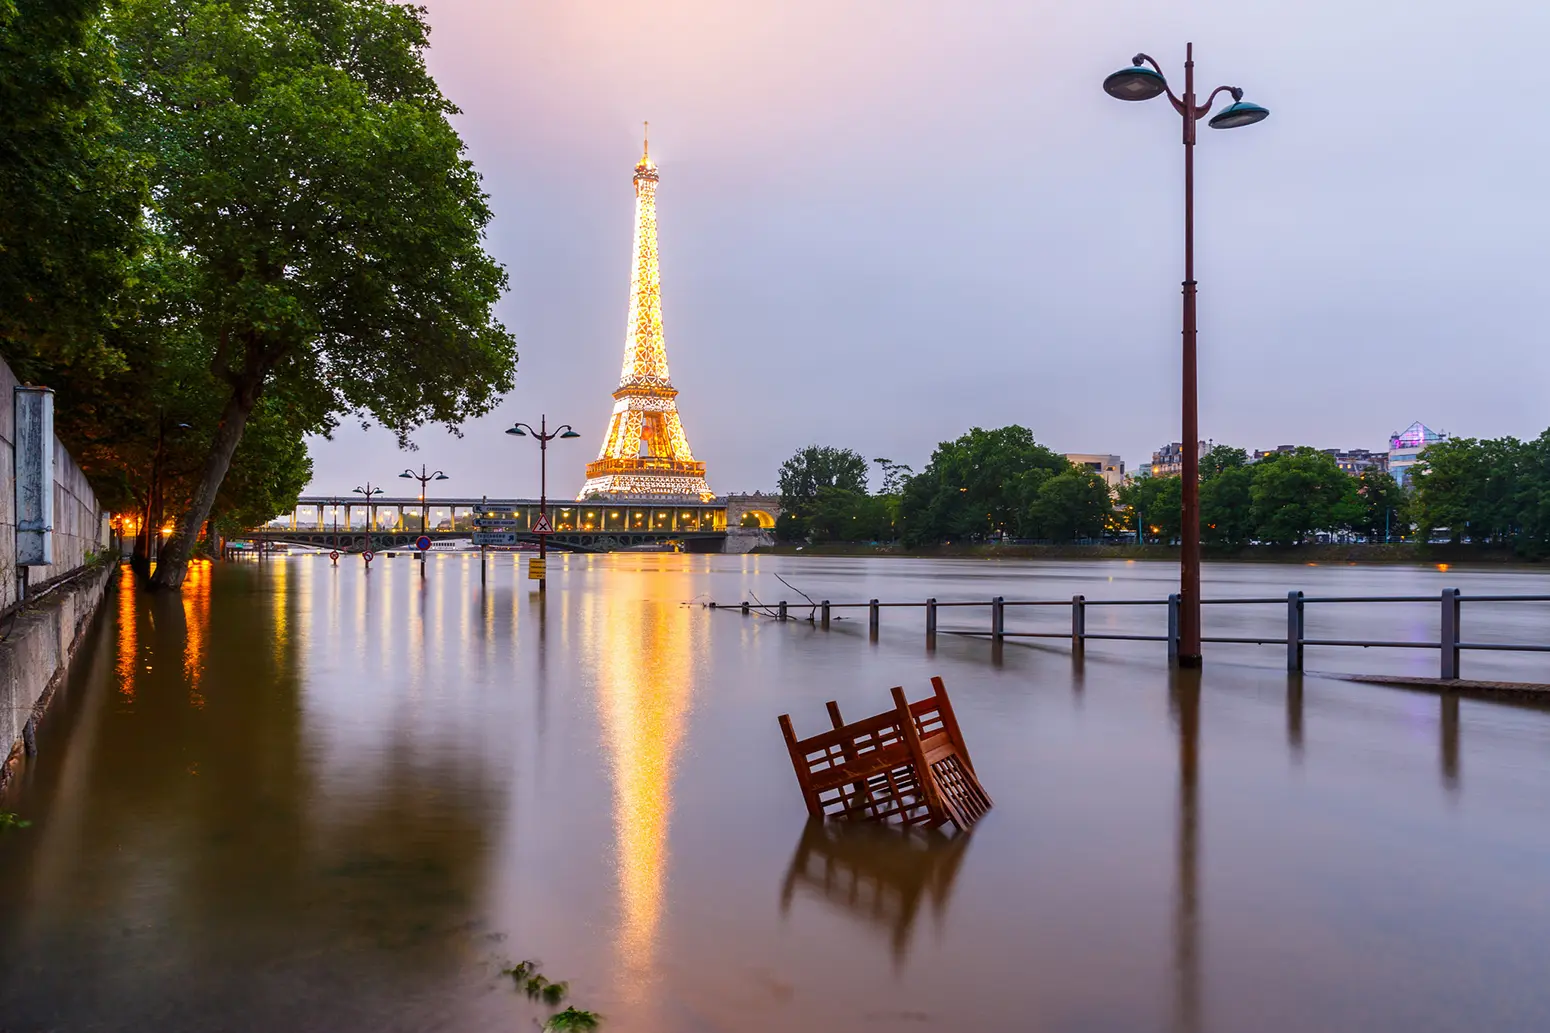 A photo of the River Seine having burst its banks in Paris, with the illuminated Eiffel Tower in the background.